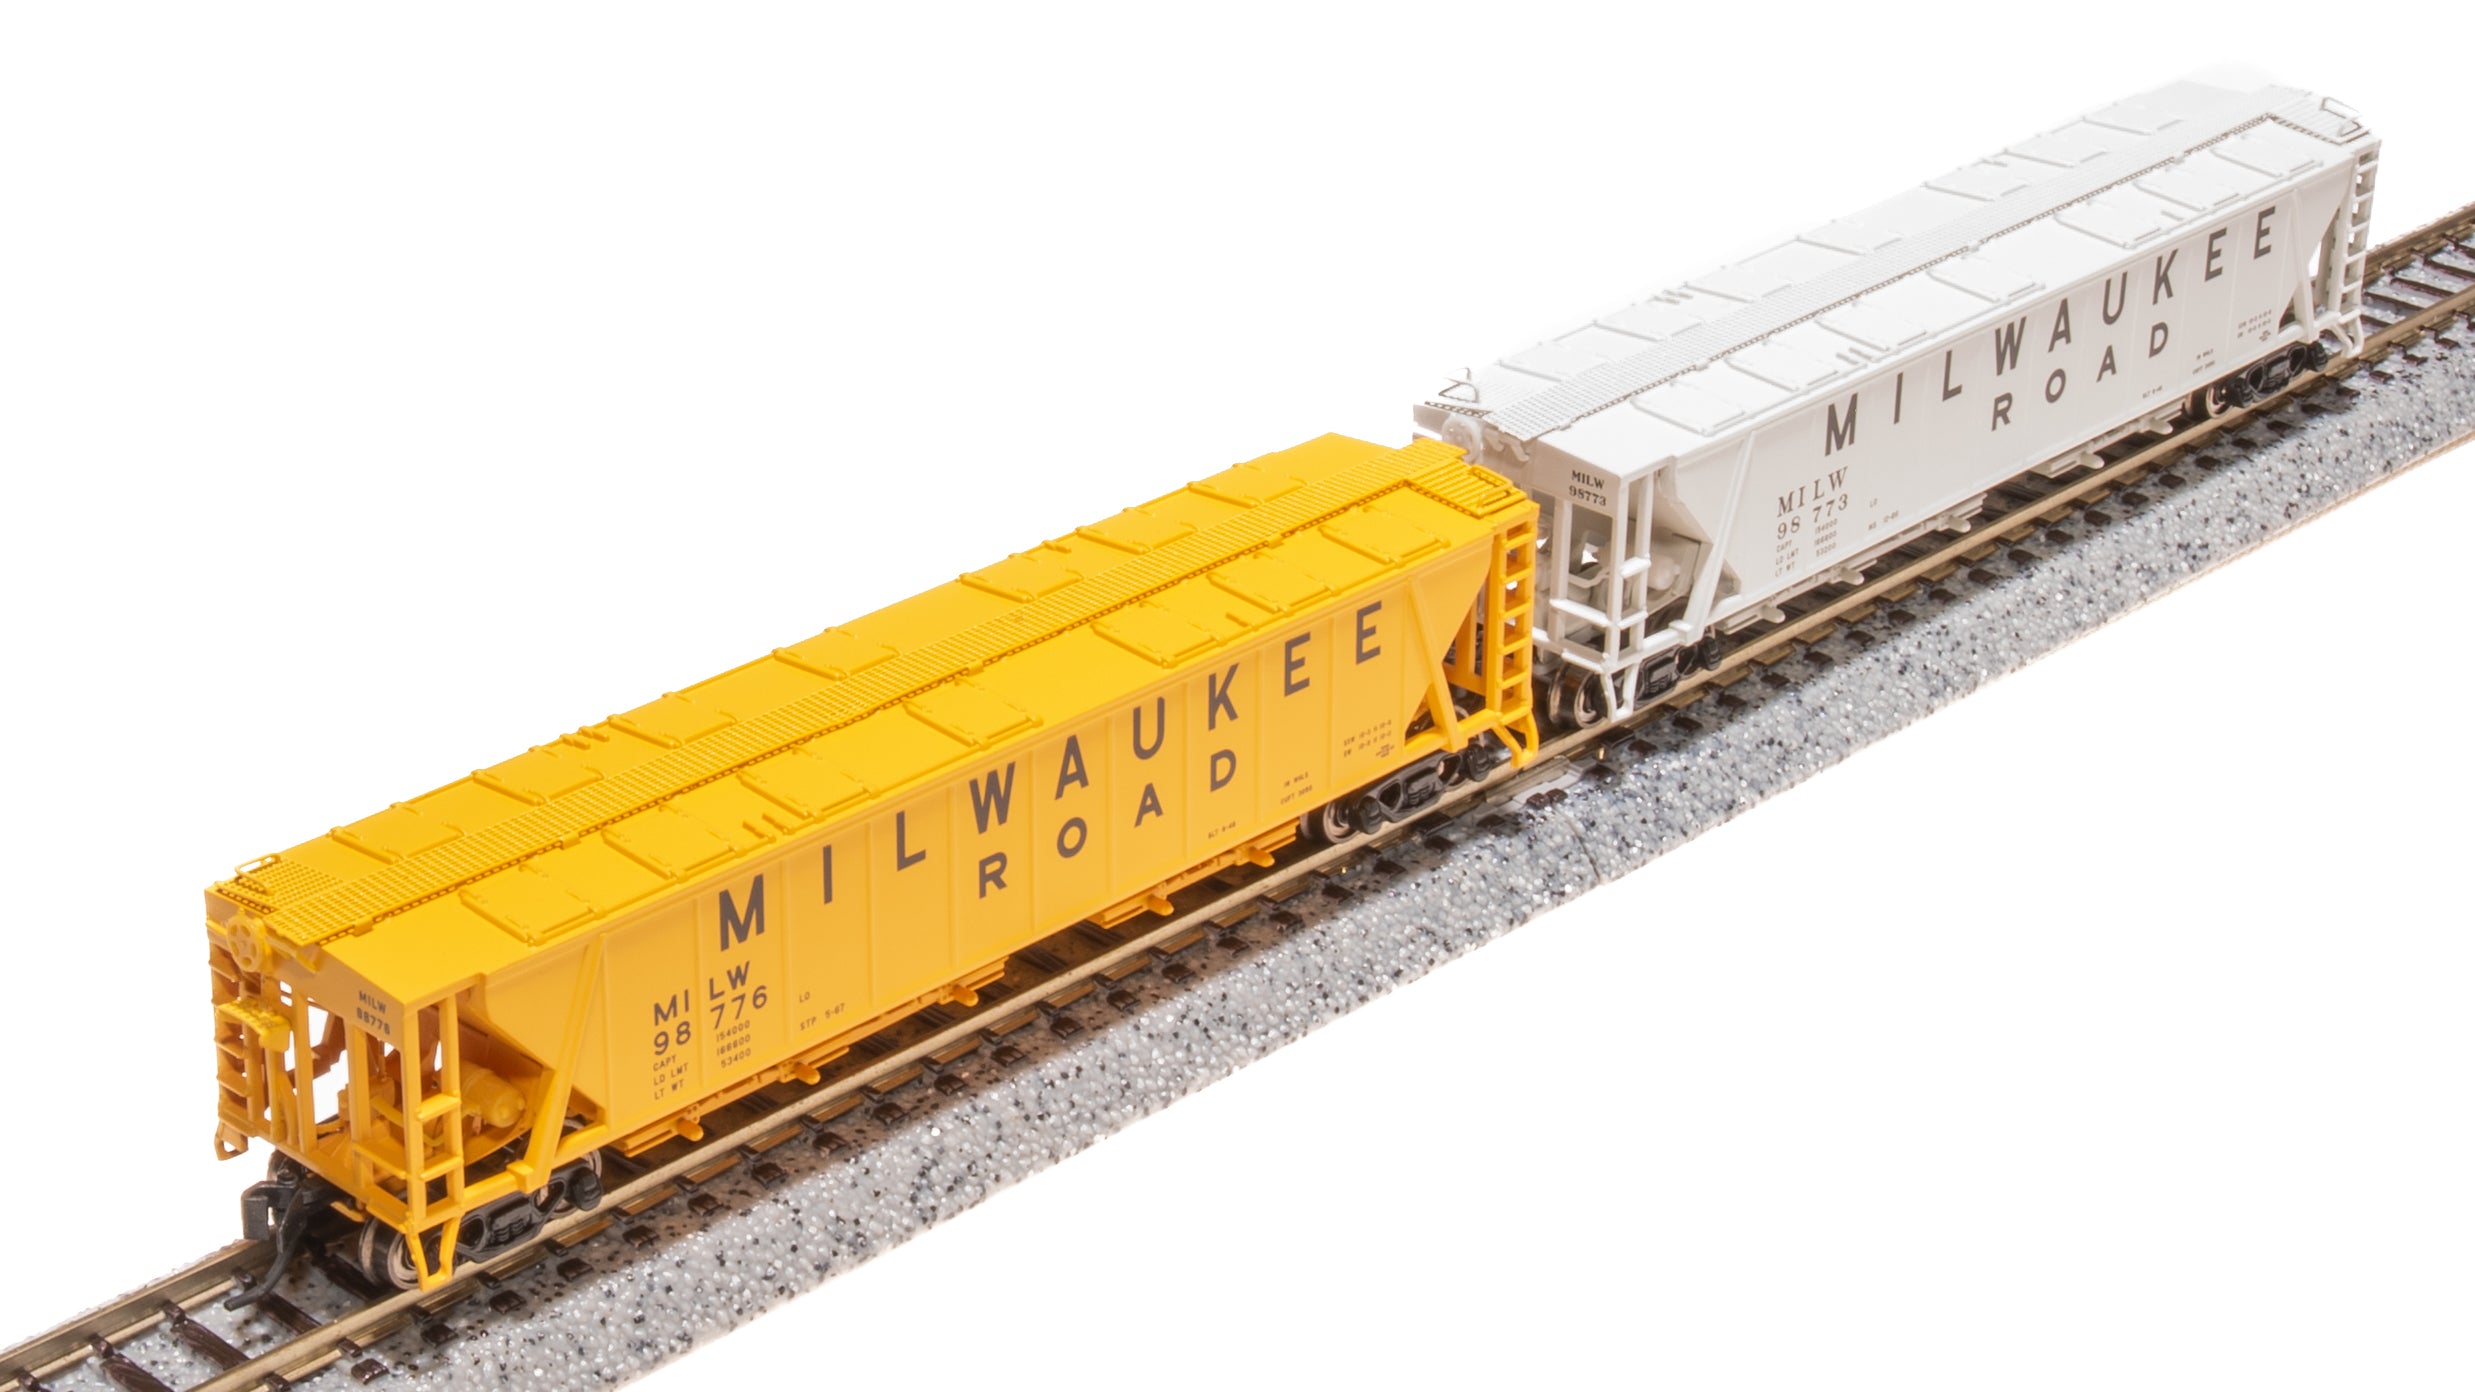 7262 H32 Covered Hopper, MILW, Variety 2-pack, N Scale (Fantasy Paint Scheme) Default Title